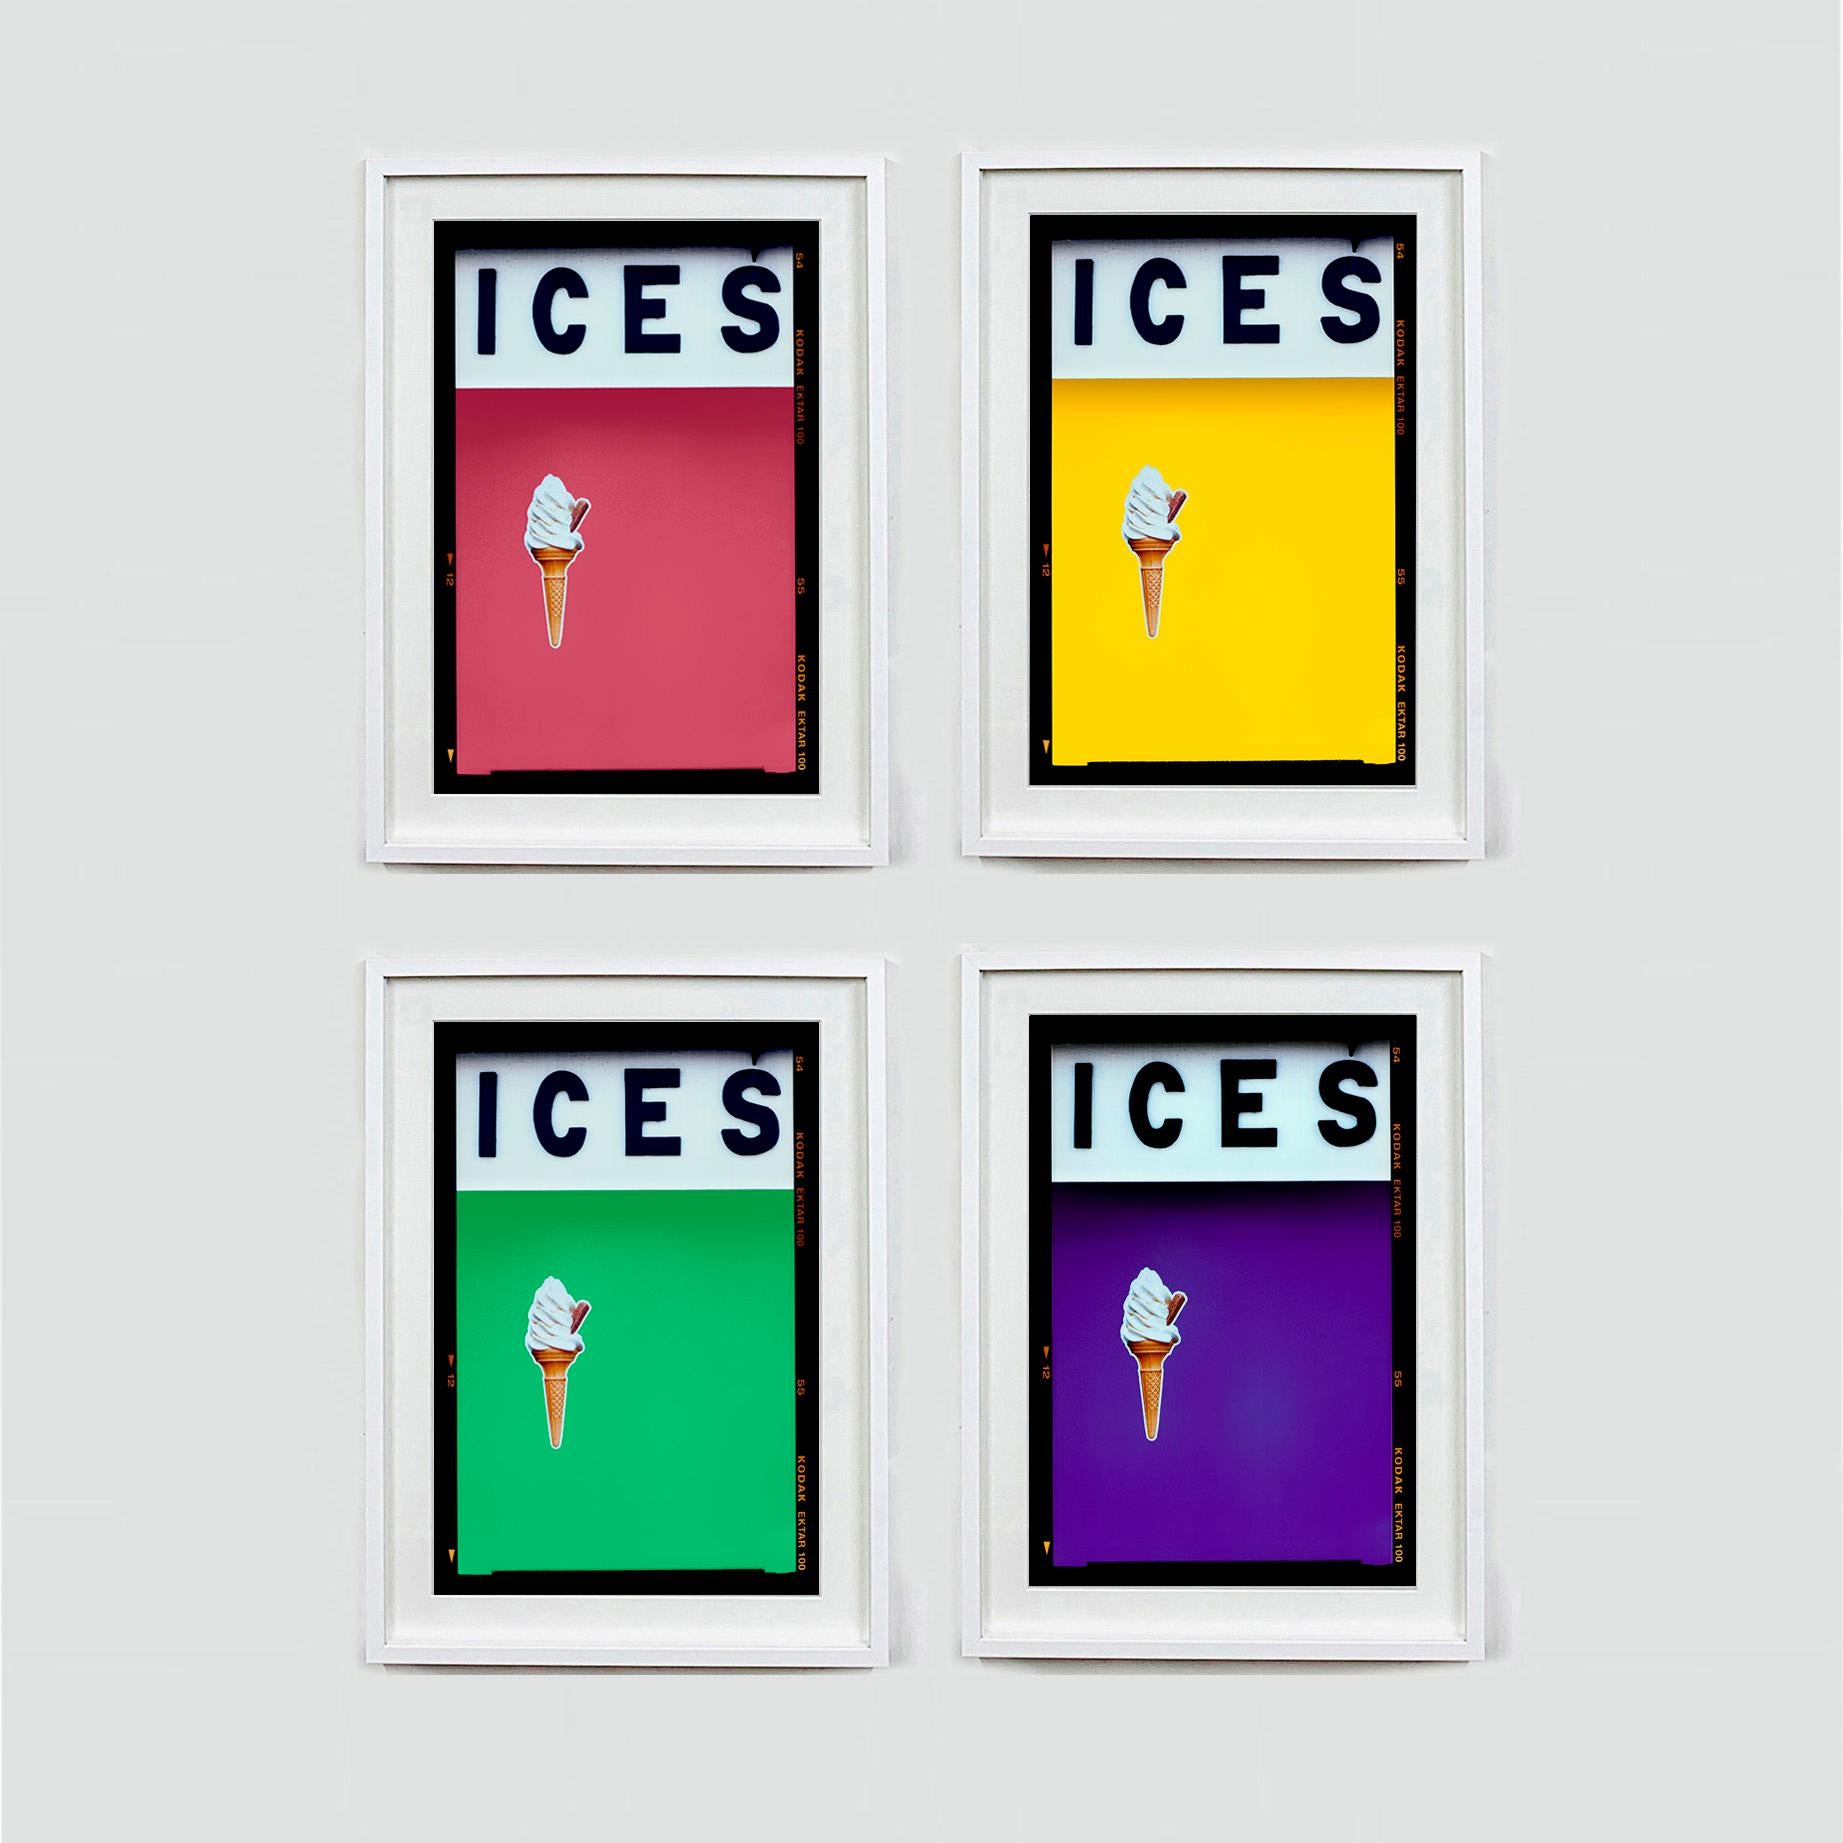 Ices (Green), Bexhill-on-Sea - British seaside color photography For Sale 2